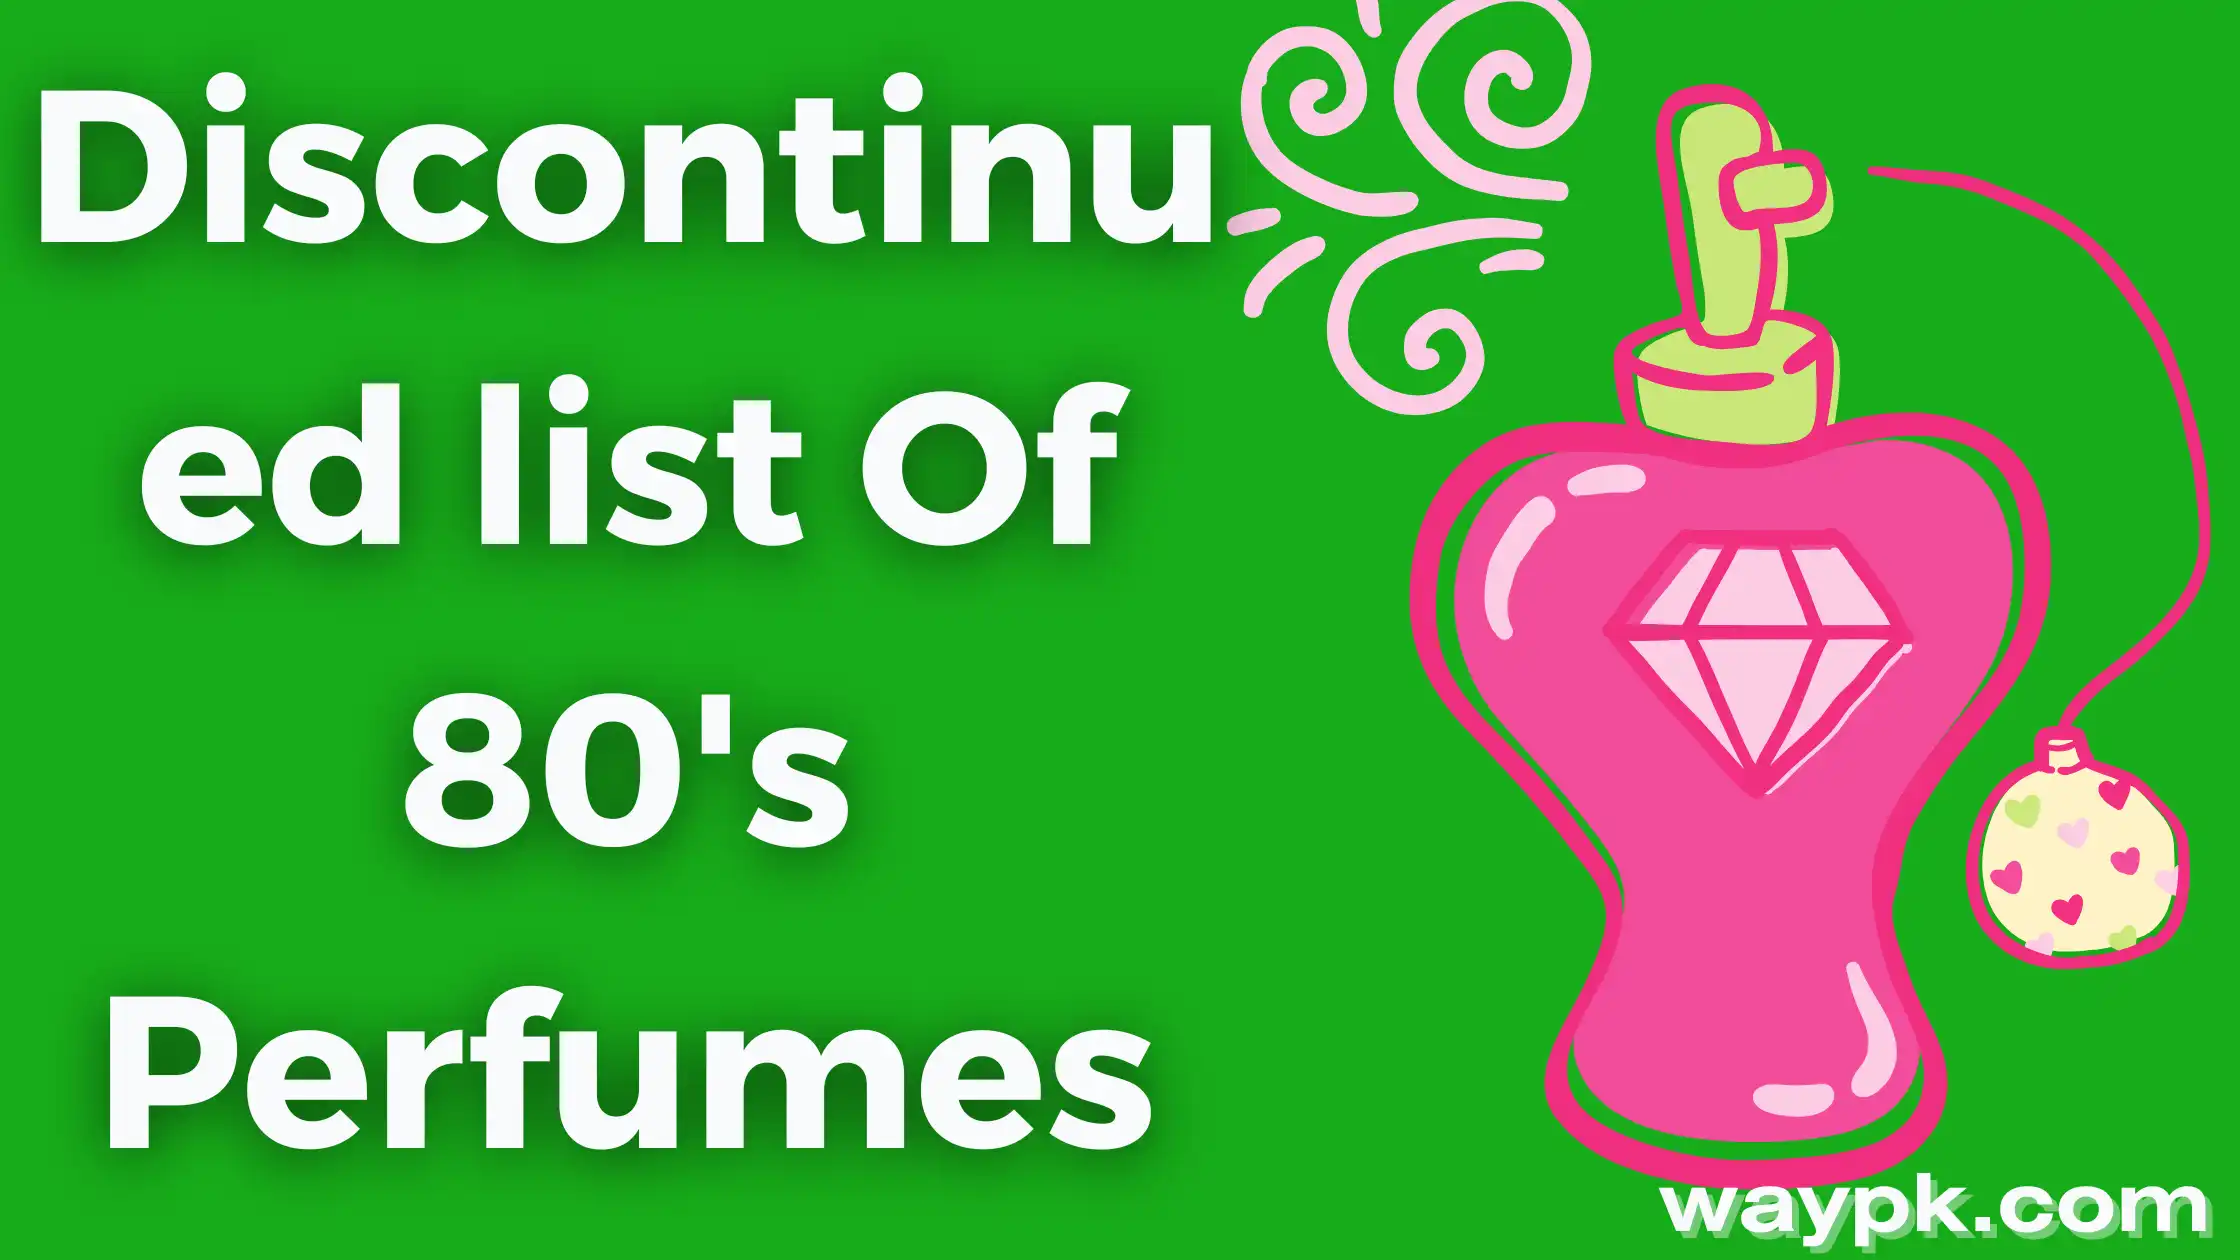 Discontinued list Of 80's Perfumes